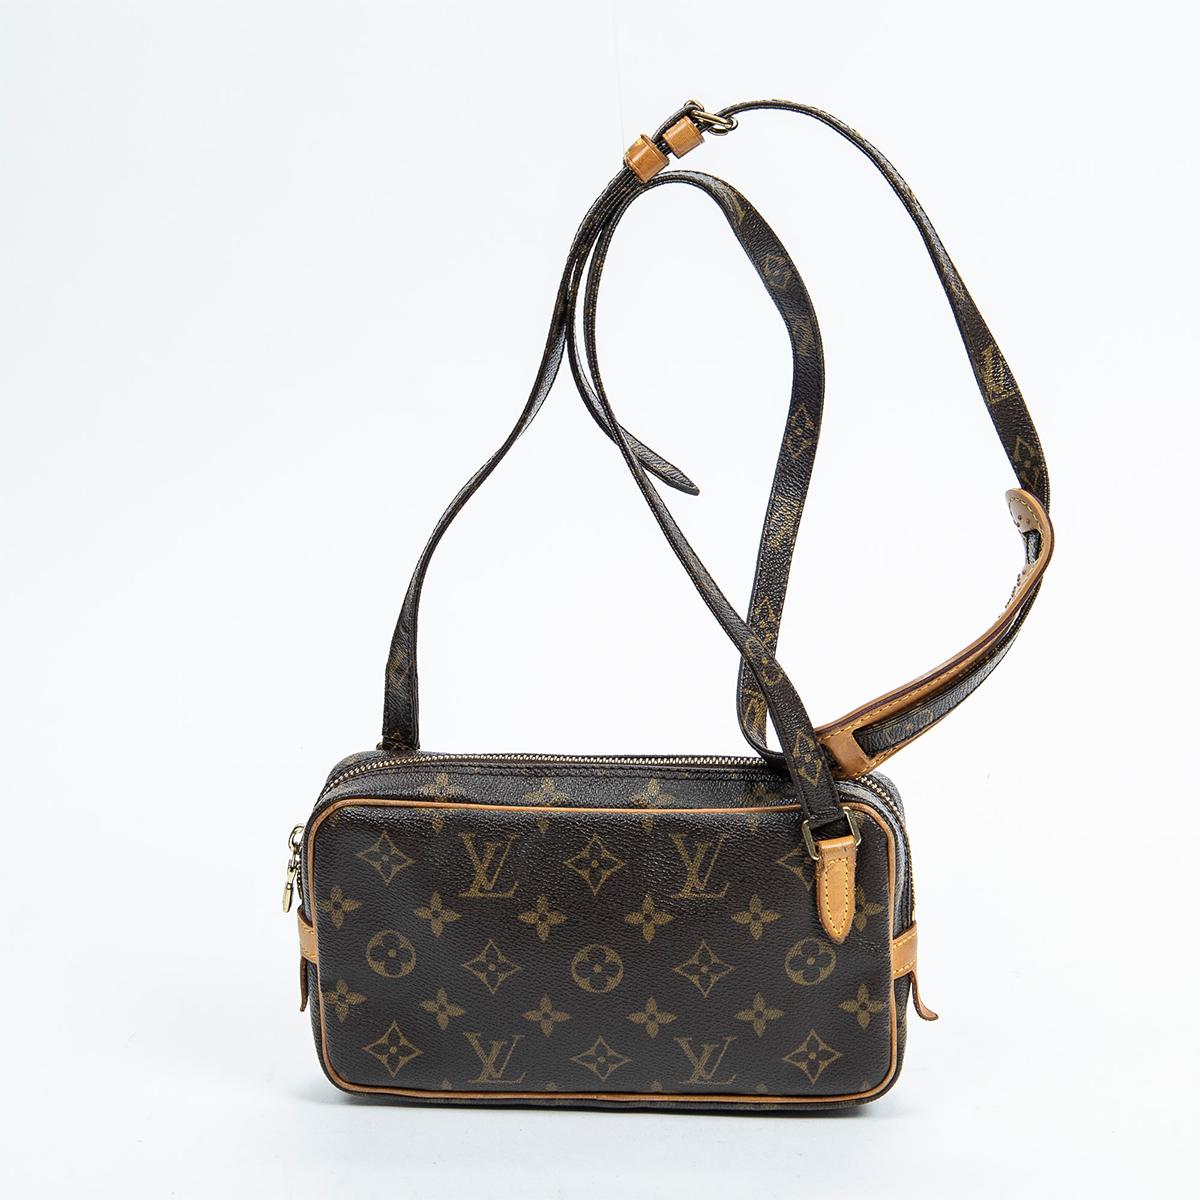 Sold at Auction: Louis Vuitton, LOUIS VUITTON MARLY BANDOULIERE